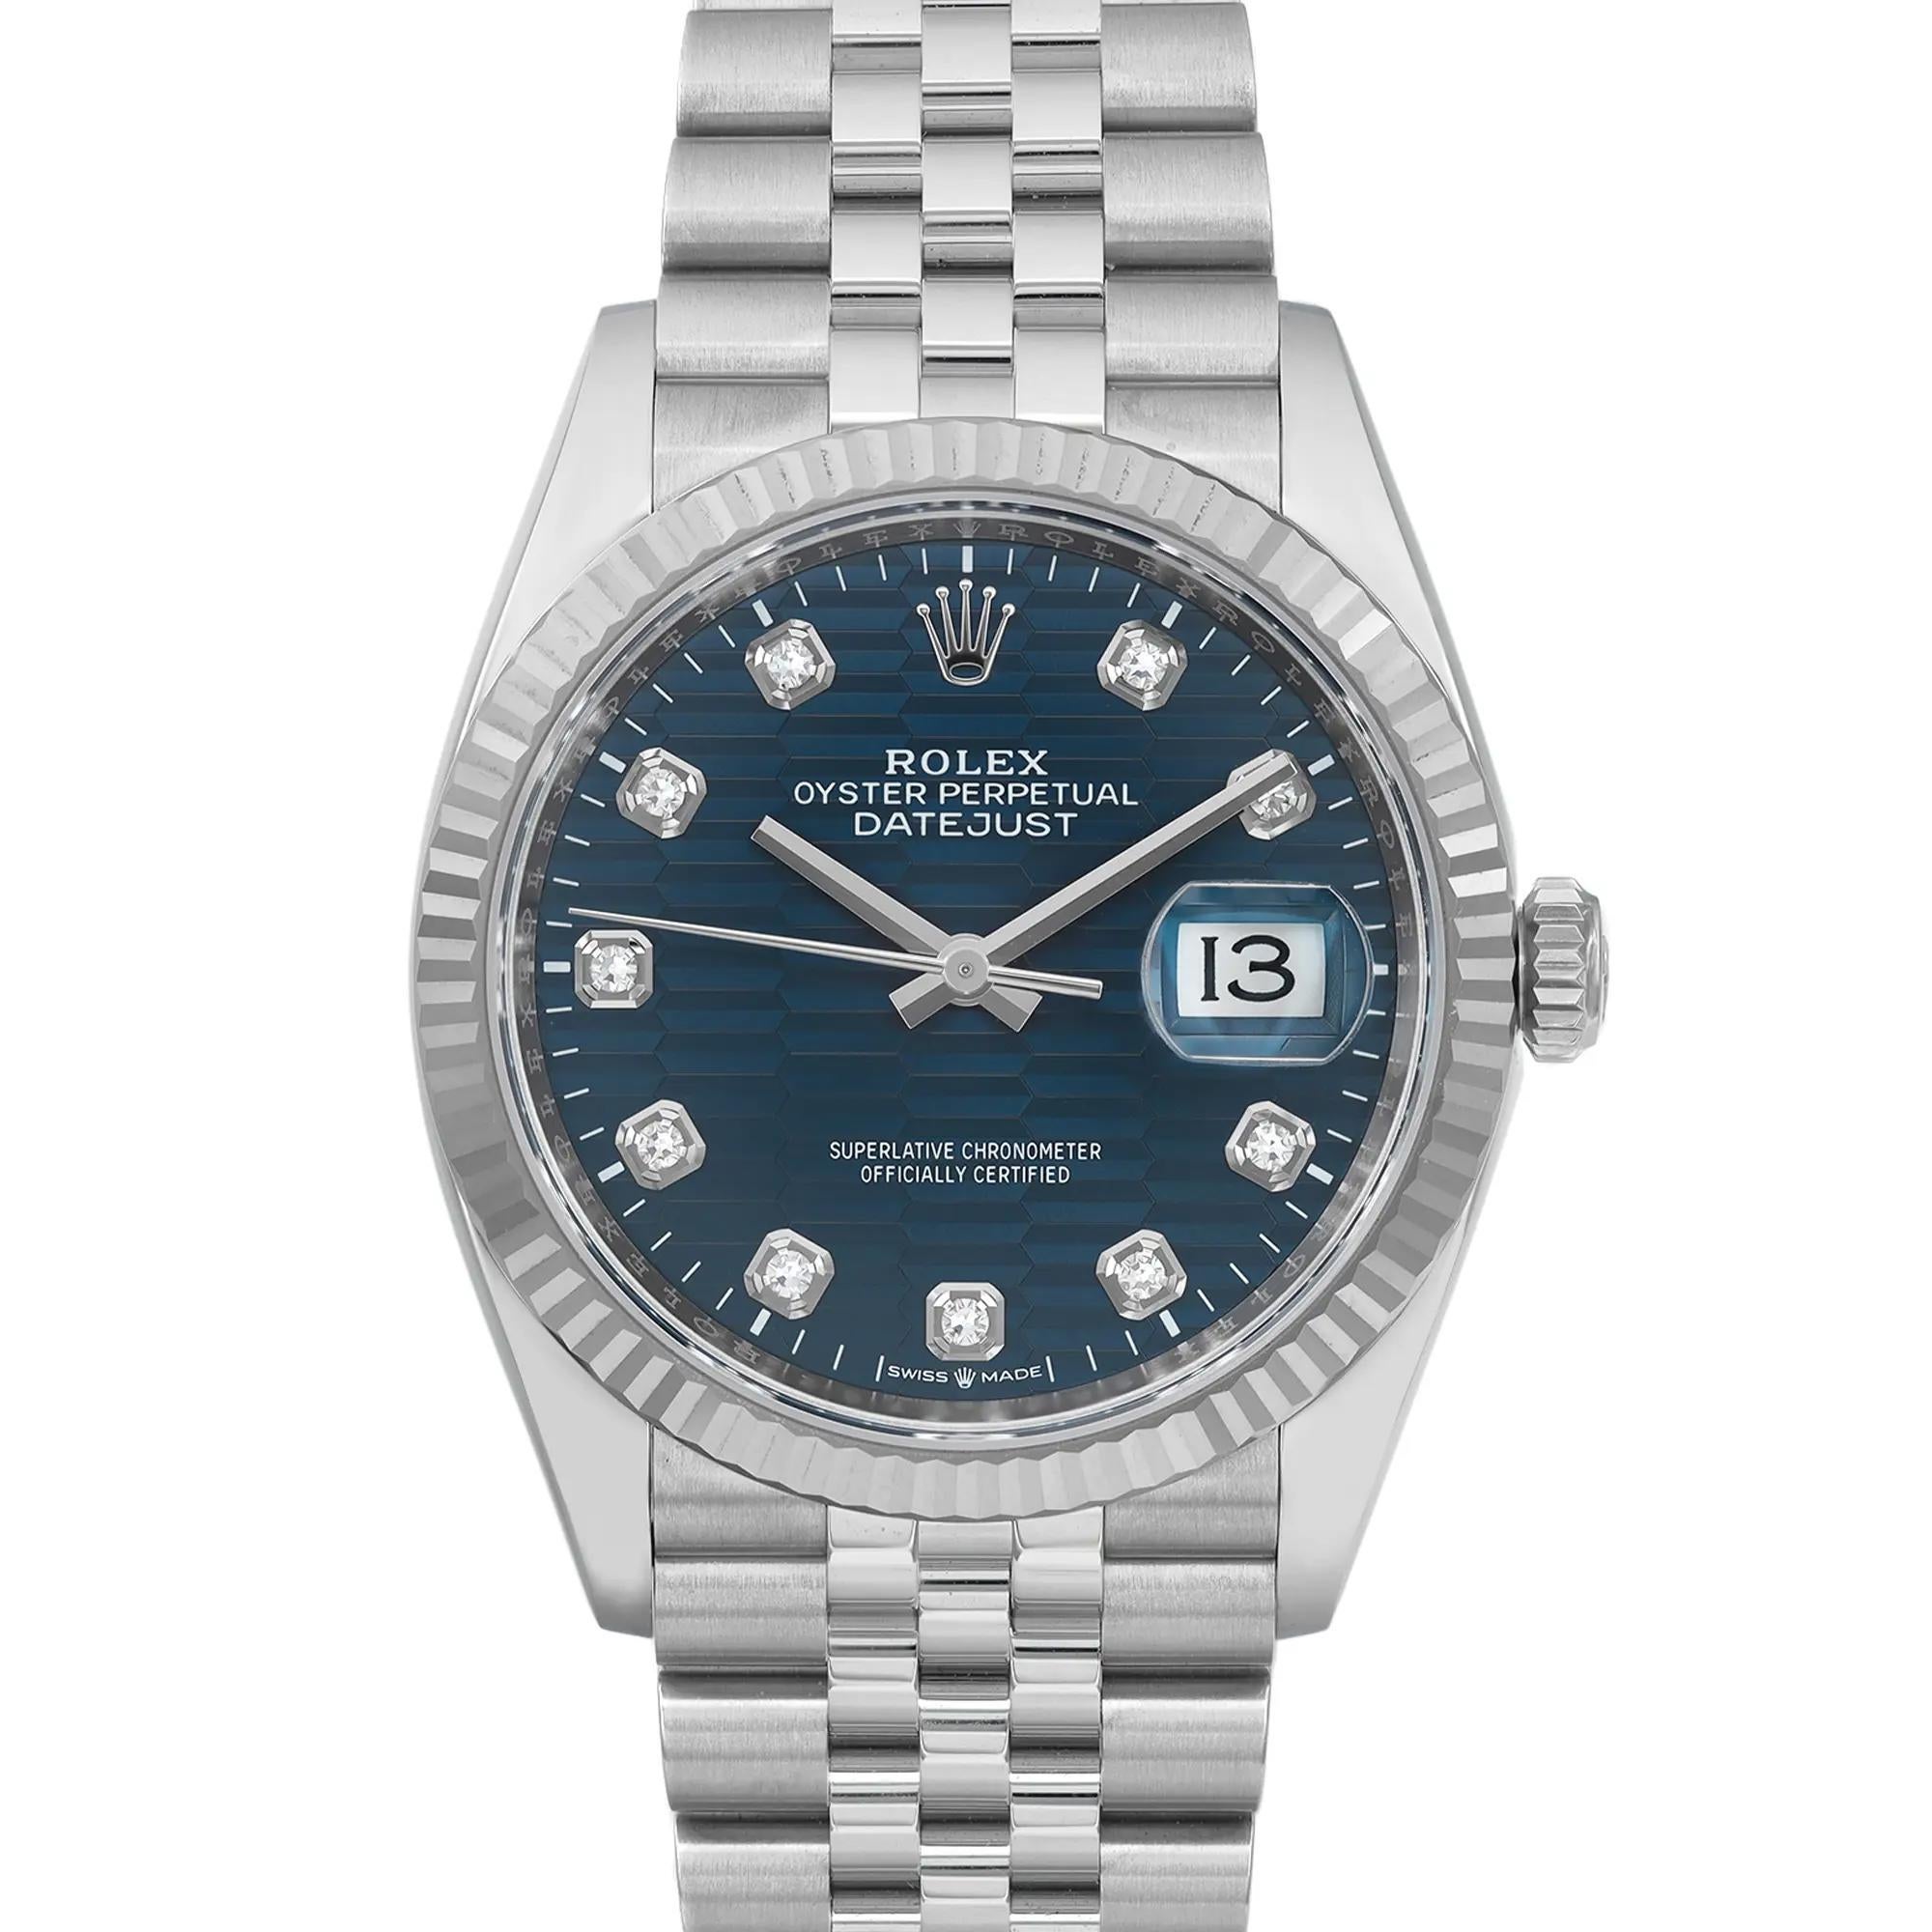 Brand new. 2024 card. The original box and papers are included.

Brand Information:

Brand: Rolex
Country/Region of Manufacture: Switzerland
Watch Type:

Type: Wristwatch
Department: Men
Style: Luxury

Model Information:
Model Number: 126234
Model: